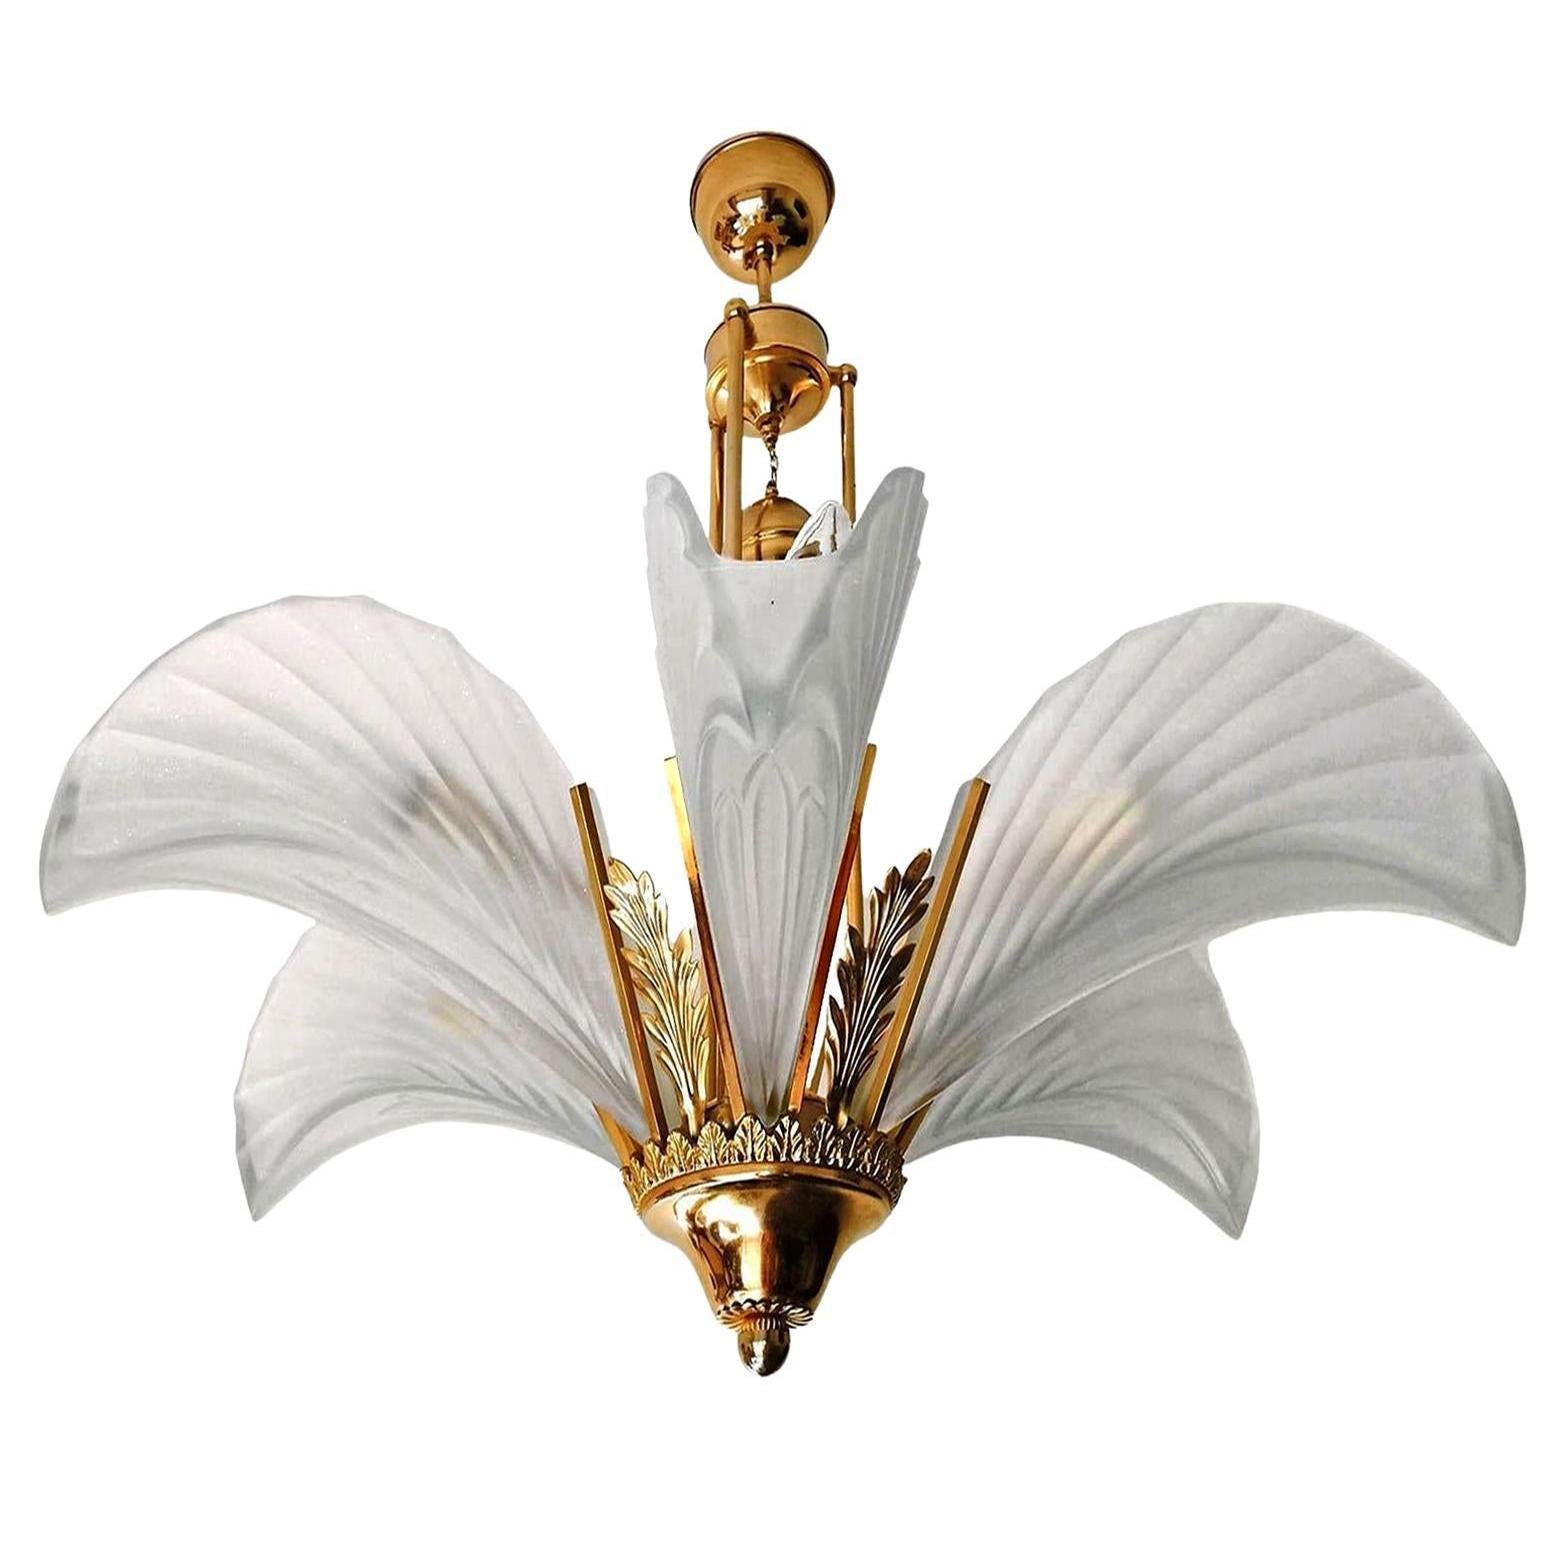 French Art Deco frosted glass leaves lamp shades gilt chandelier. 
Dimentions:
Diameter 28.5 in/ 72 cm
Height 25.2 in/ 64 cm
Weight: 8Kg / 18 lb
6 light bulbs E14 Good working condition
Assembly required.
    